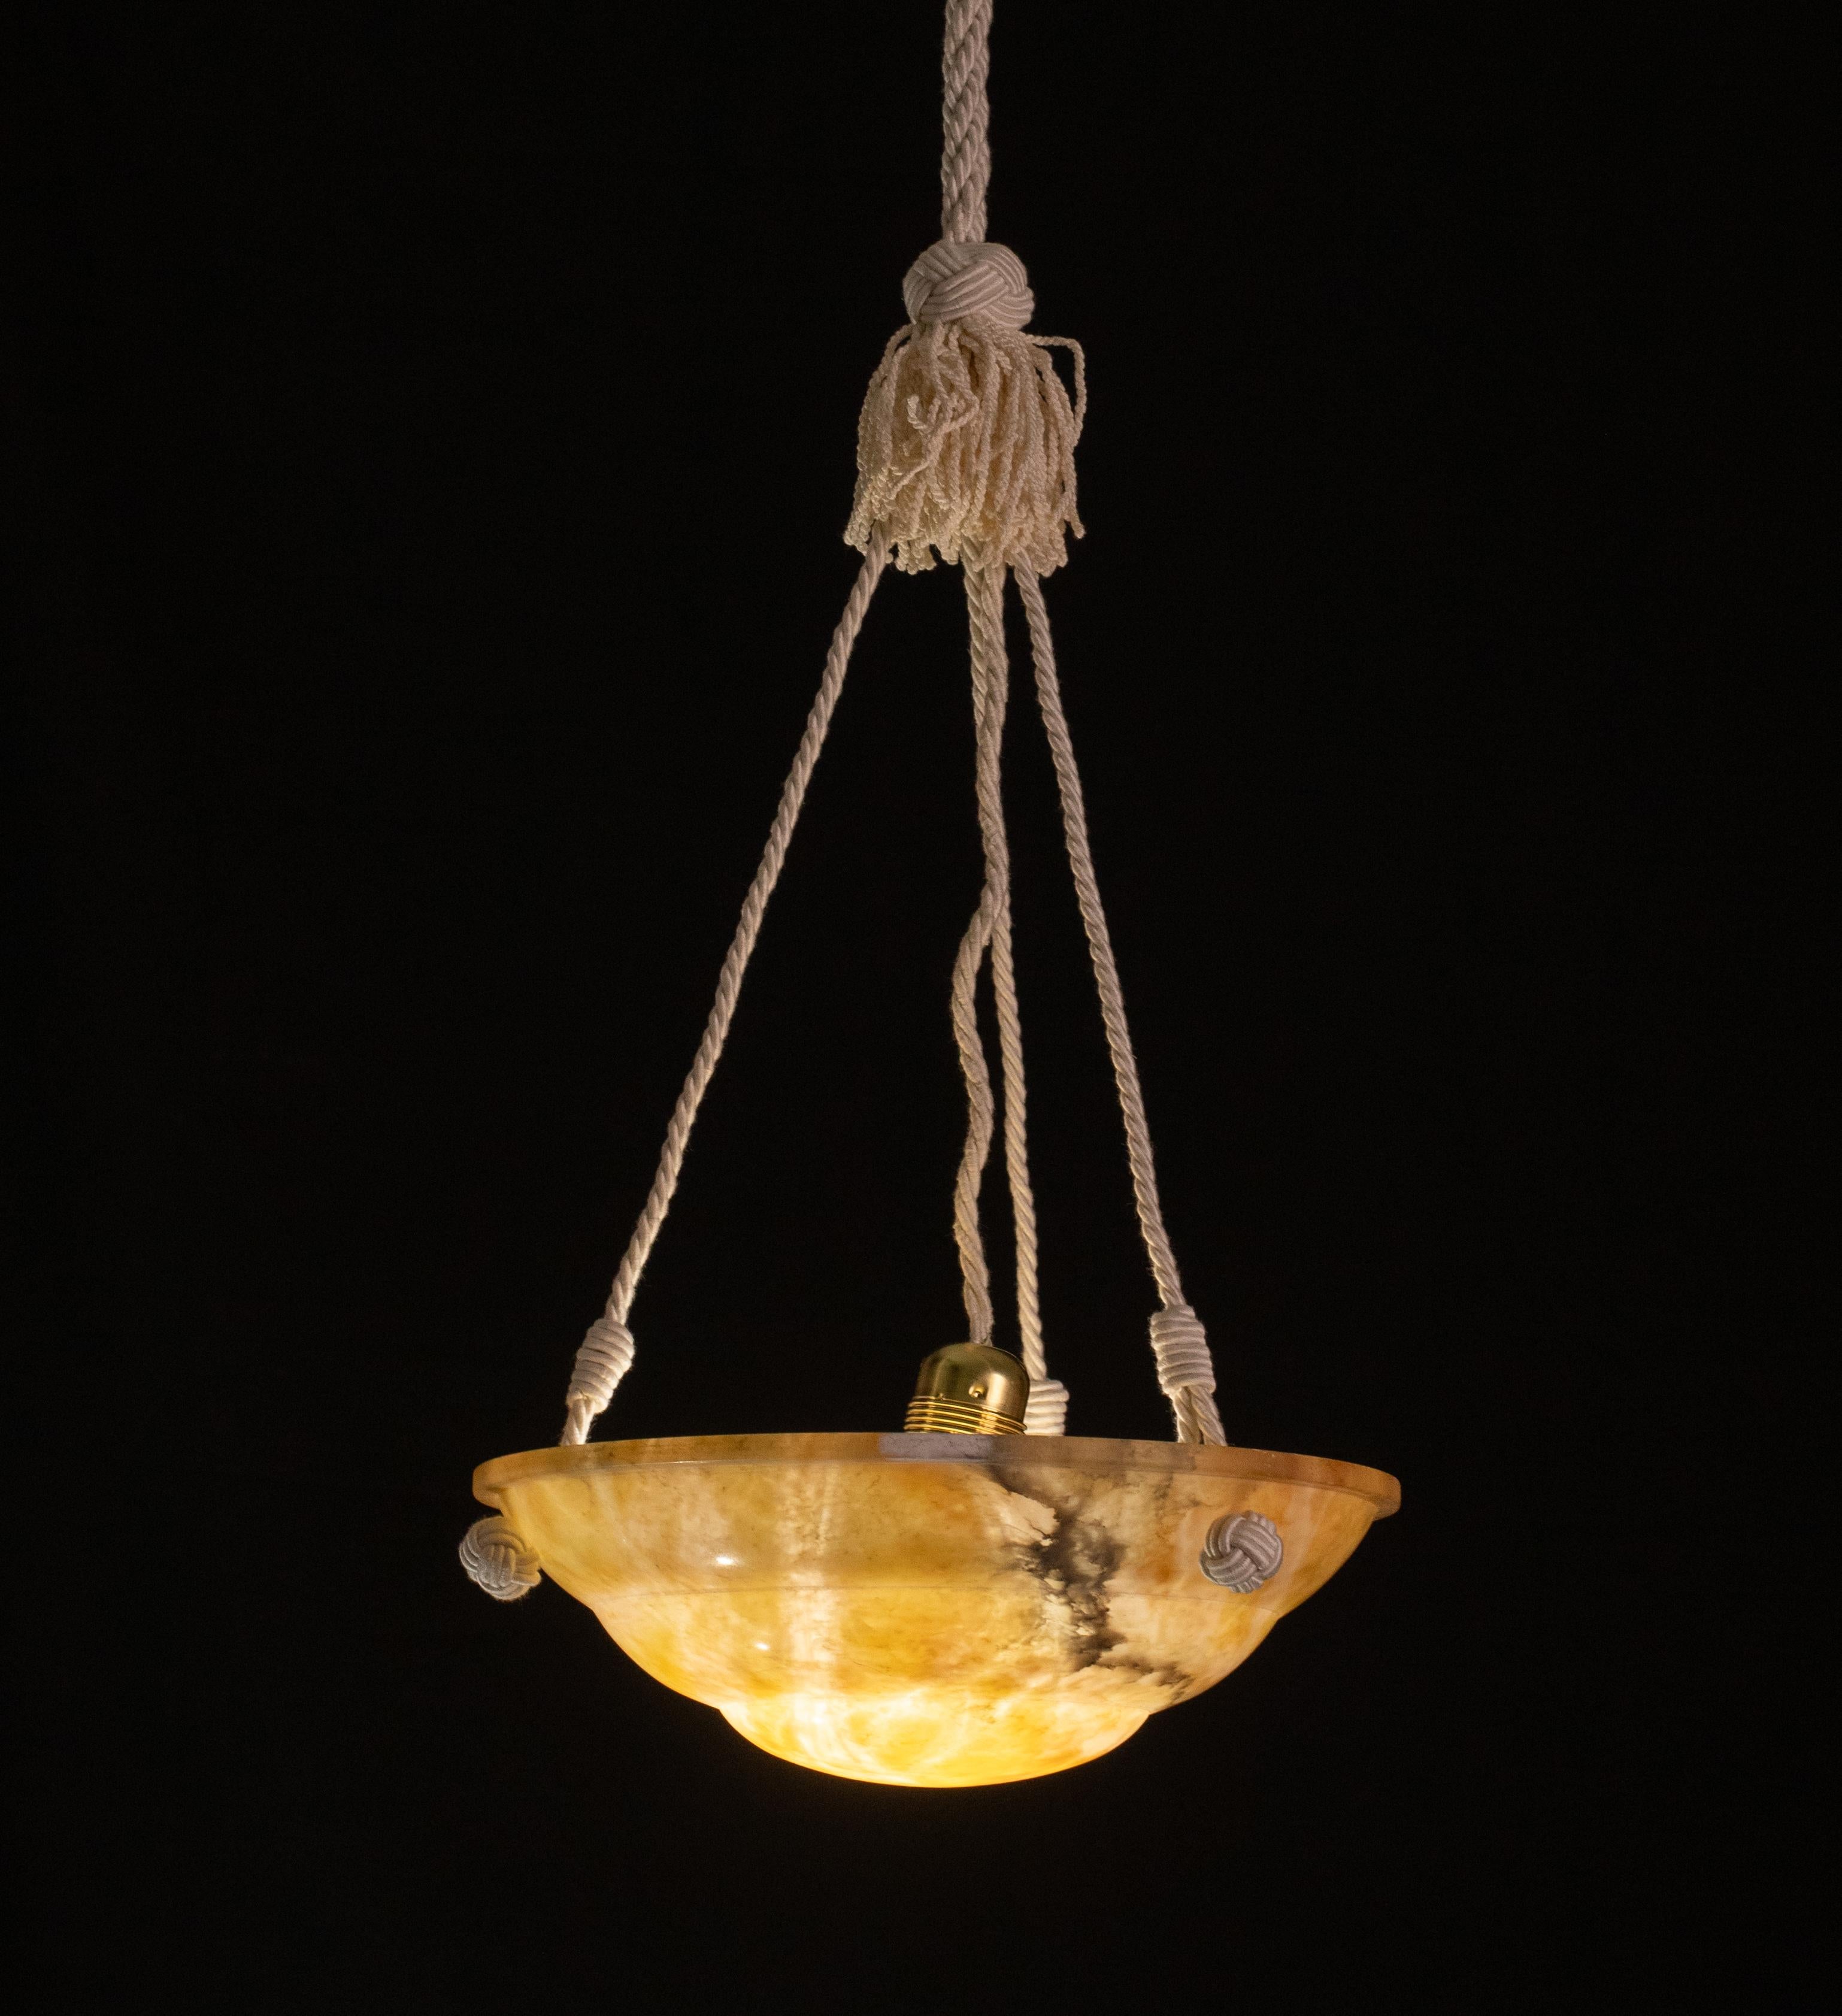 Orange alabaster chandelier. Period circa 1940. The chandelier is 85 centimetres high, the diameter measures 30 centimetres. 
The stone is completely original, the three rope cord has been replaced is new, can be shortened or lengthened on request.